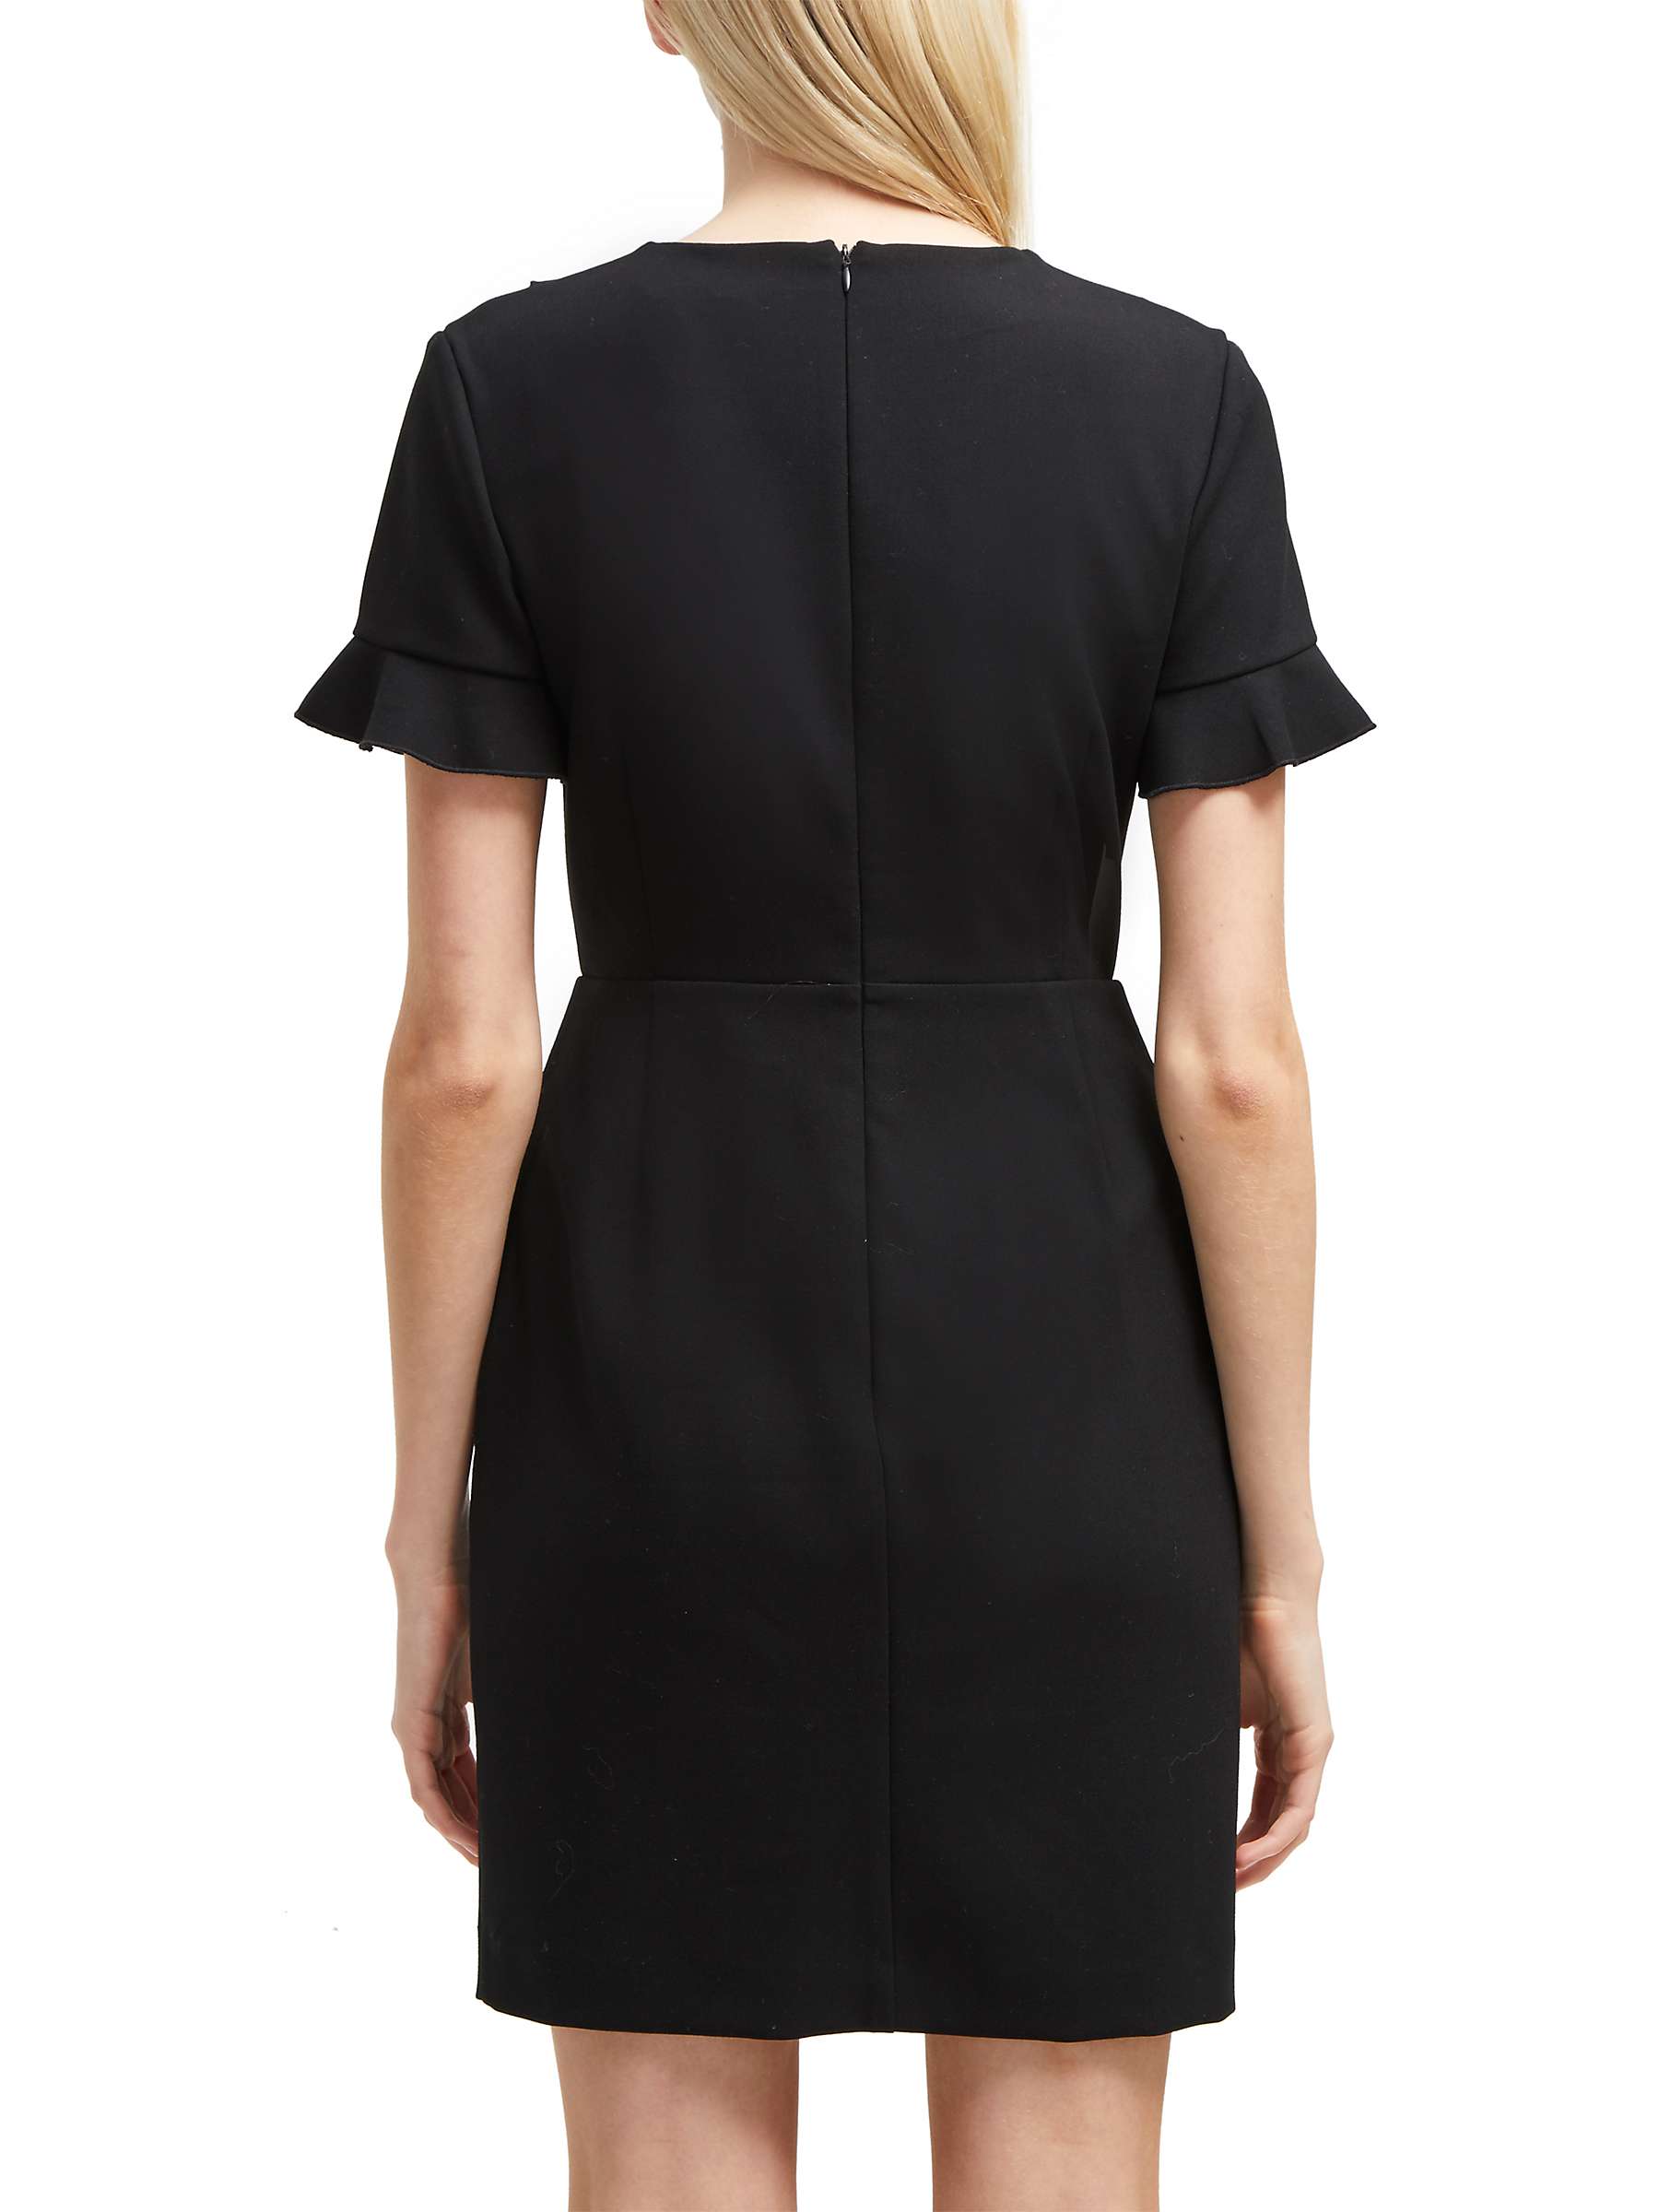 Buy French Connection Stretch Frill Dress Online at johnlewis.com